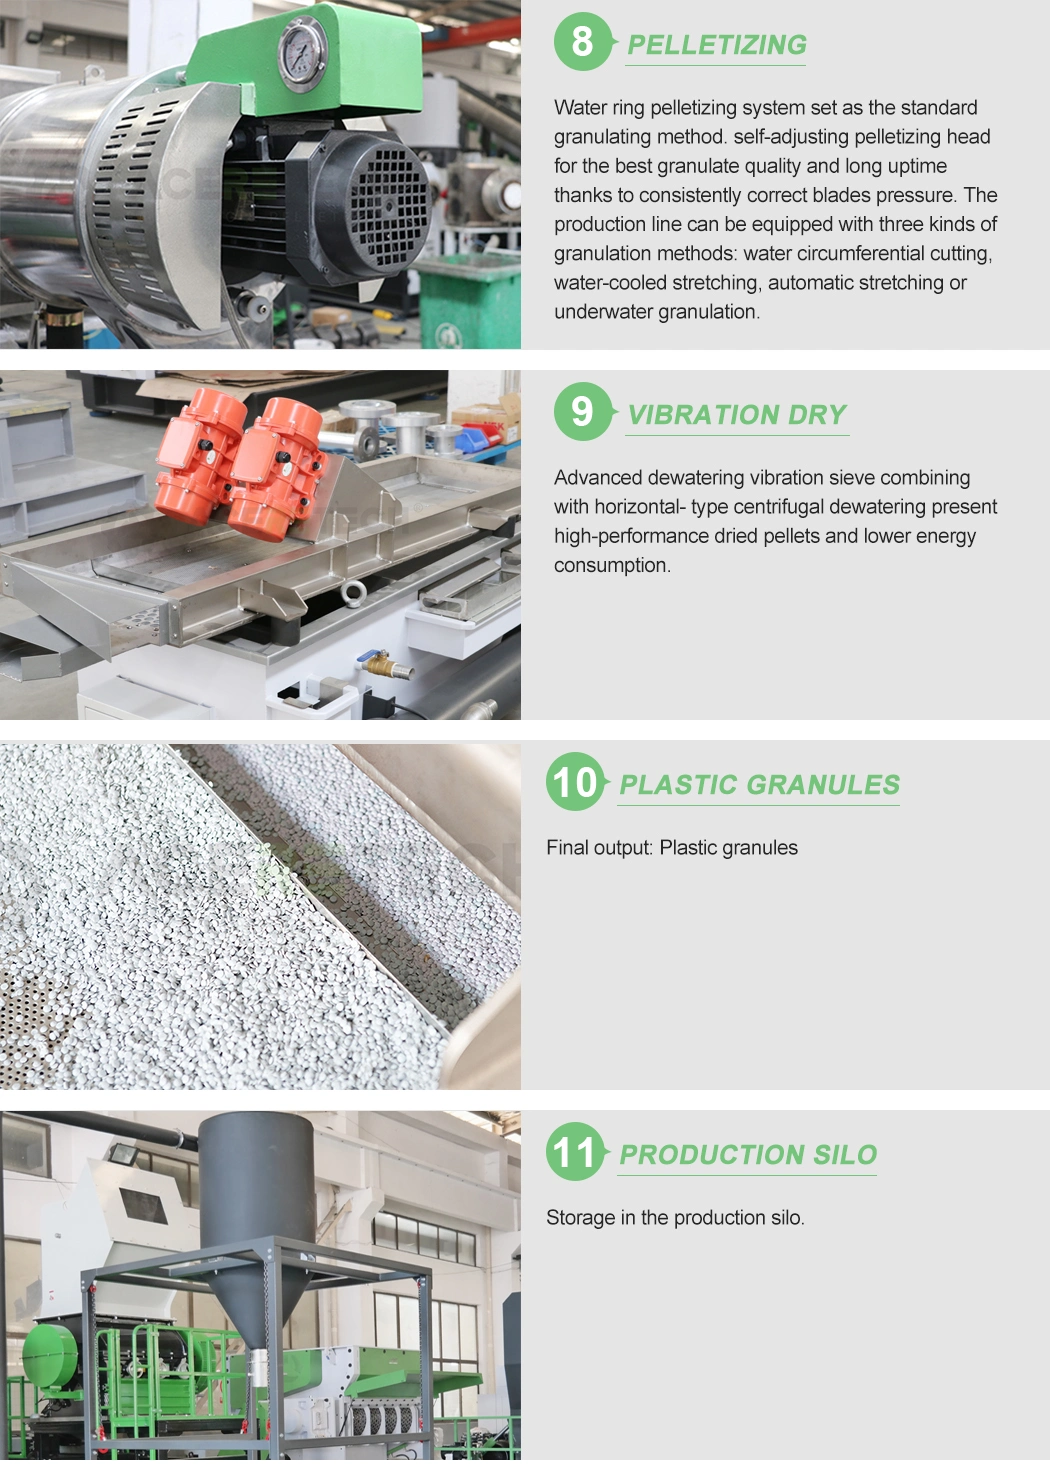 Two Stage Plastic Recycling System for PE Raffia